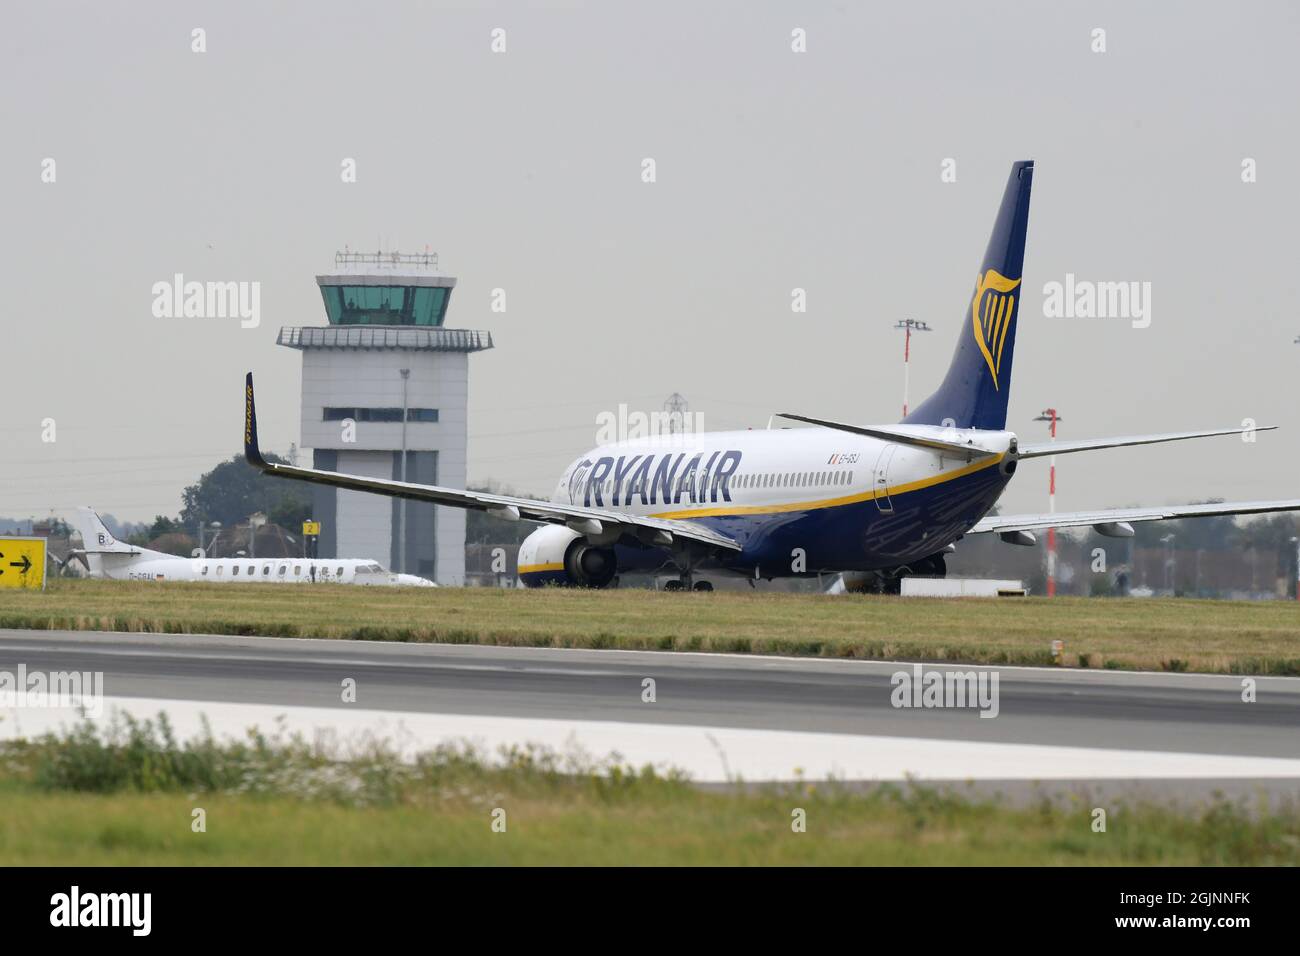 Southend, Essex, UK. 11th Sep, 2021. Ryanair have announced they will quit operations at Southend Airport from November 1st 2021. This follows the departure of EasyJet last year meaning no passenger flights will depart from the Essex Airport after that date. Credit: MARTIN DALTON/Alamy Live News Stock Photo